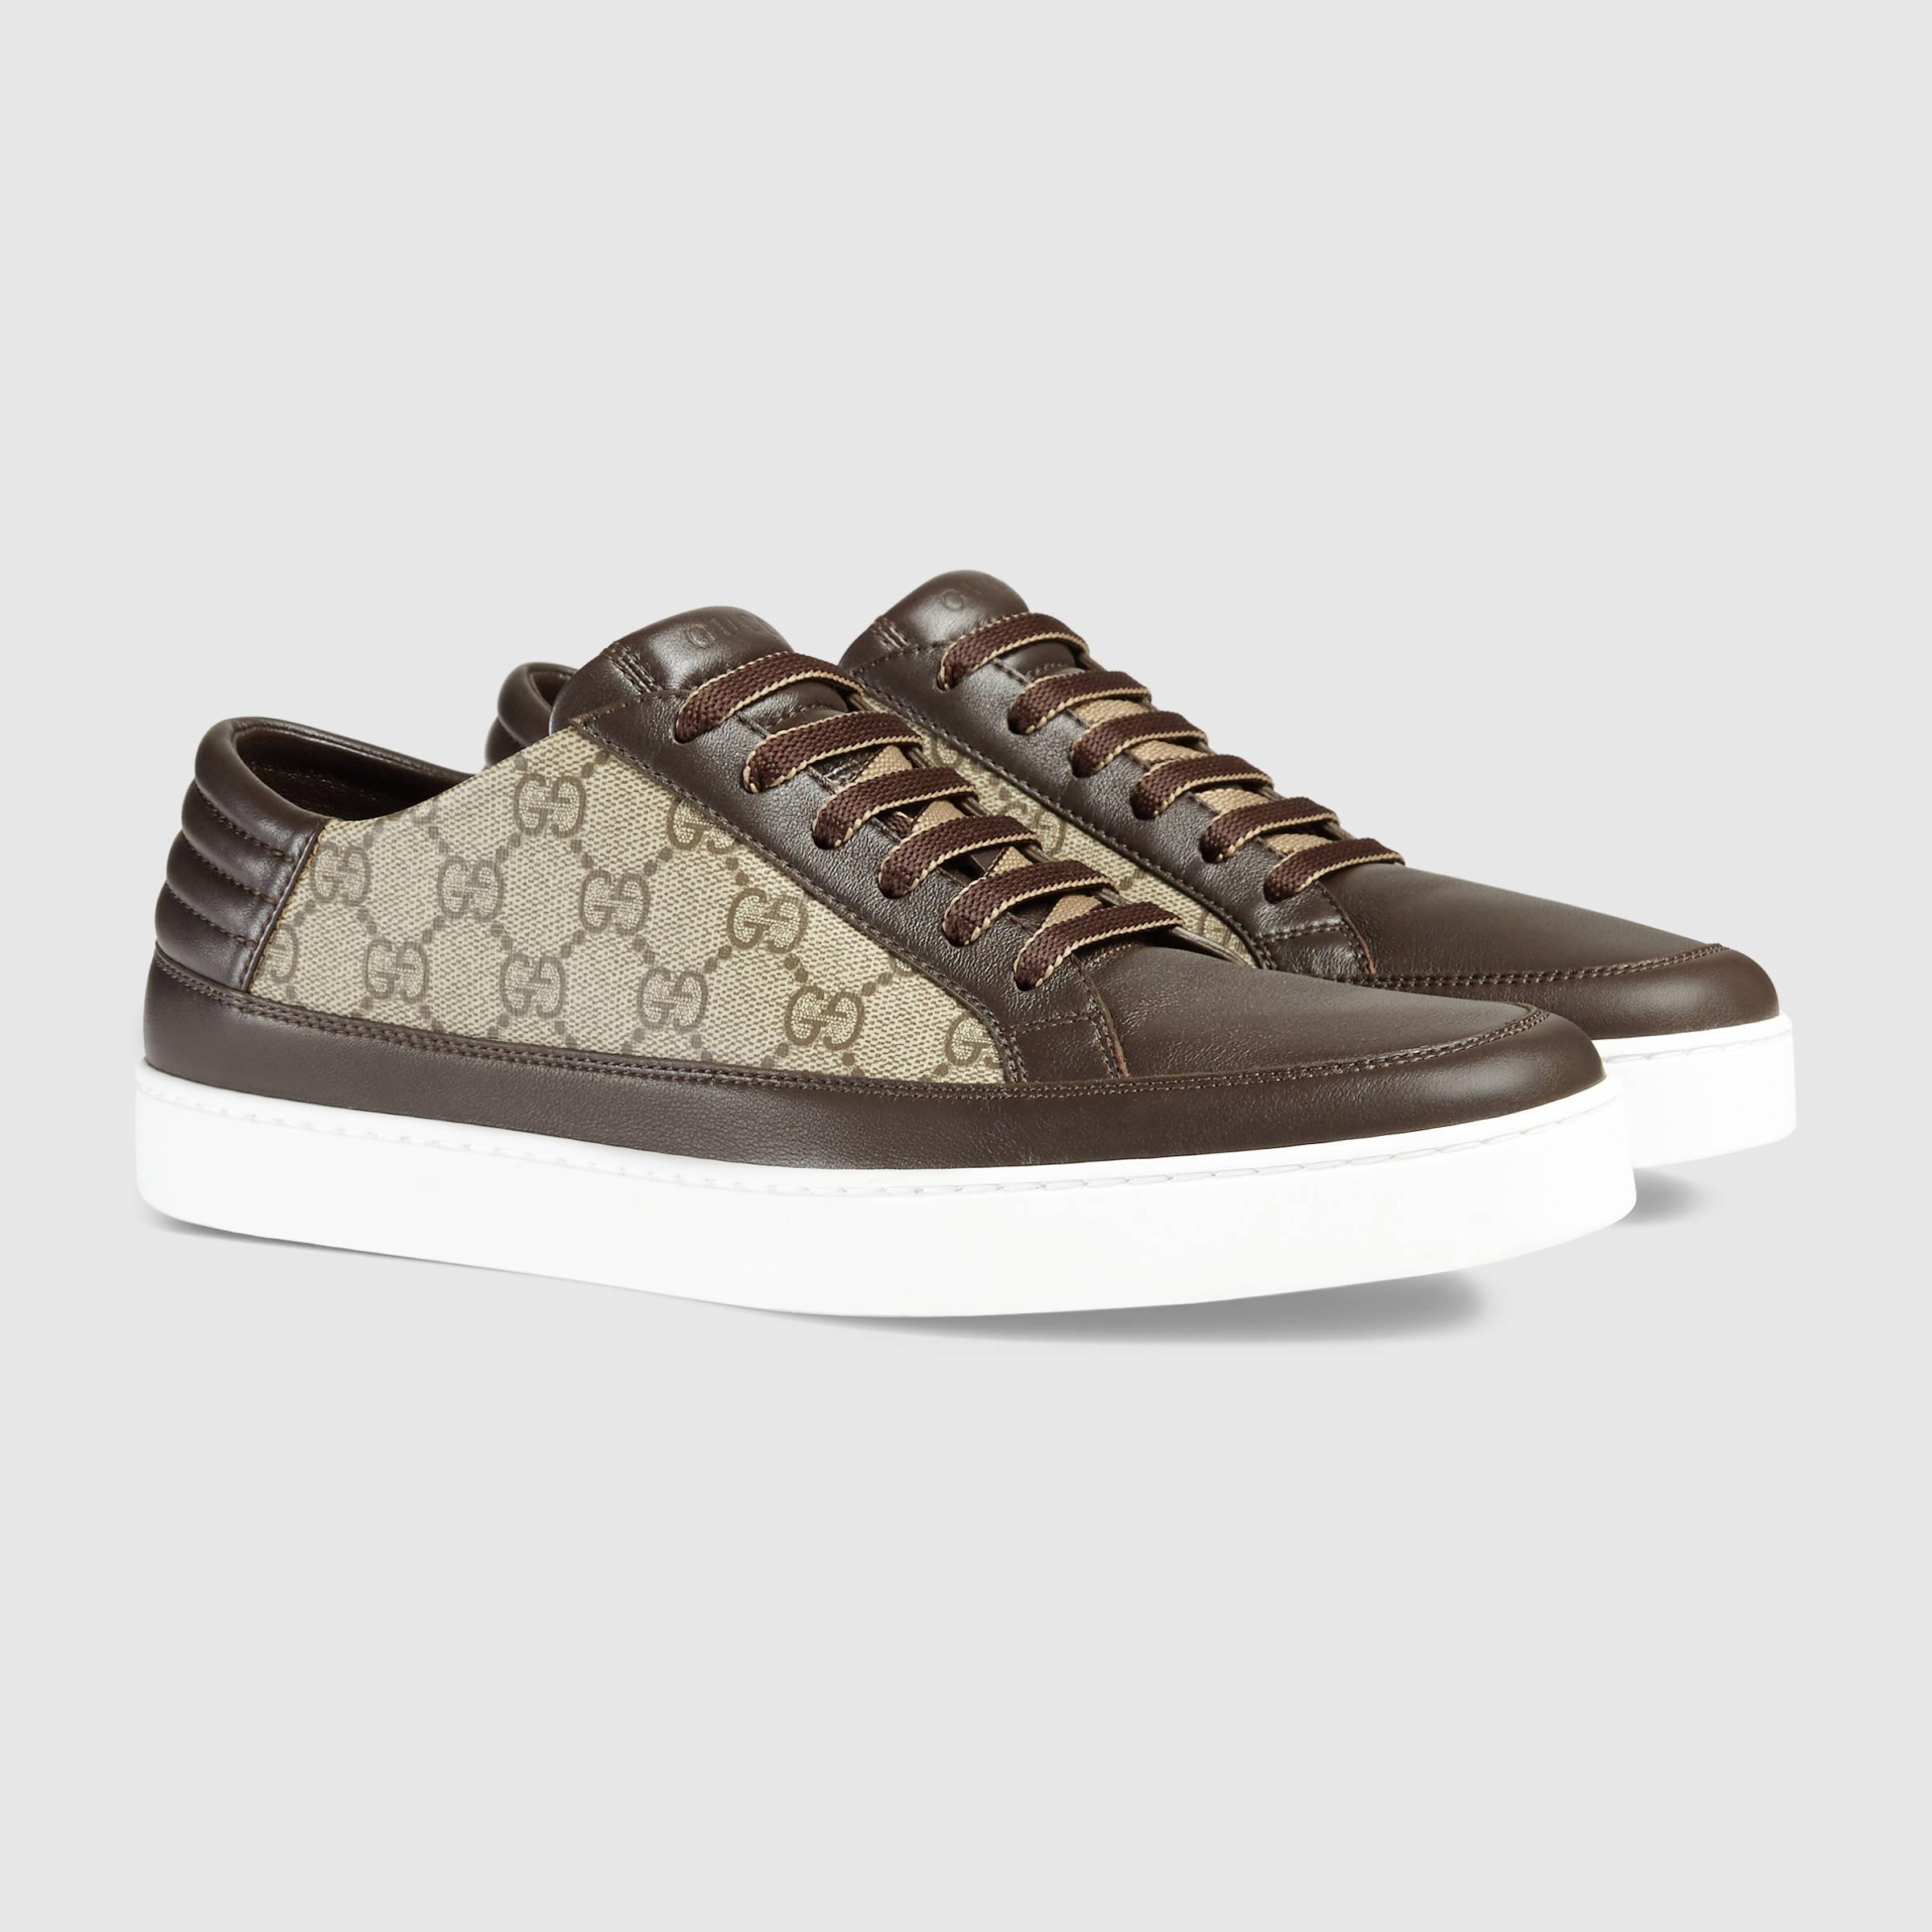 Gucci Canvas Gg Supreme Sneaker in Brown for Men - Lyst